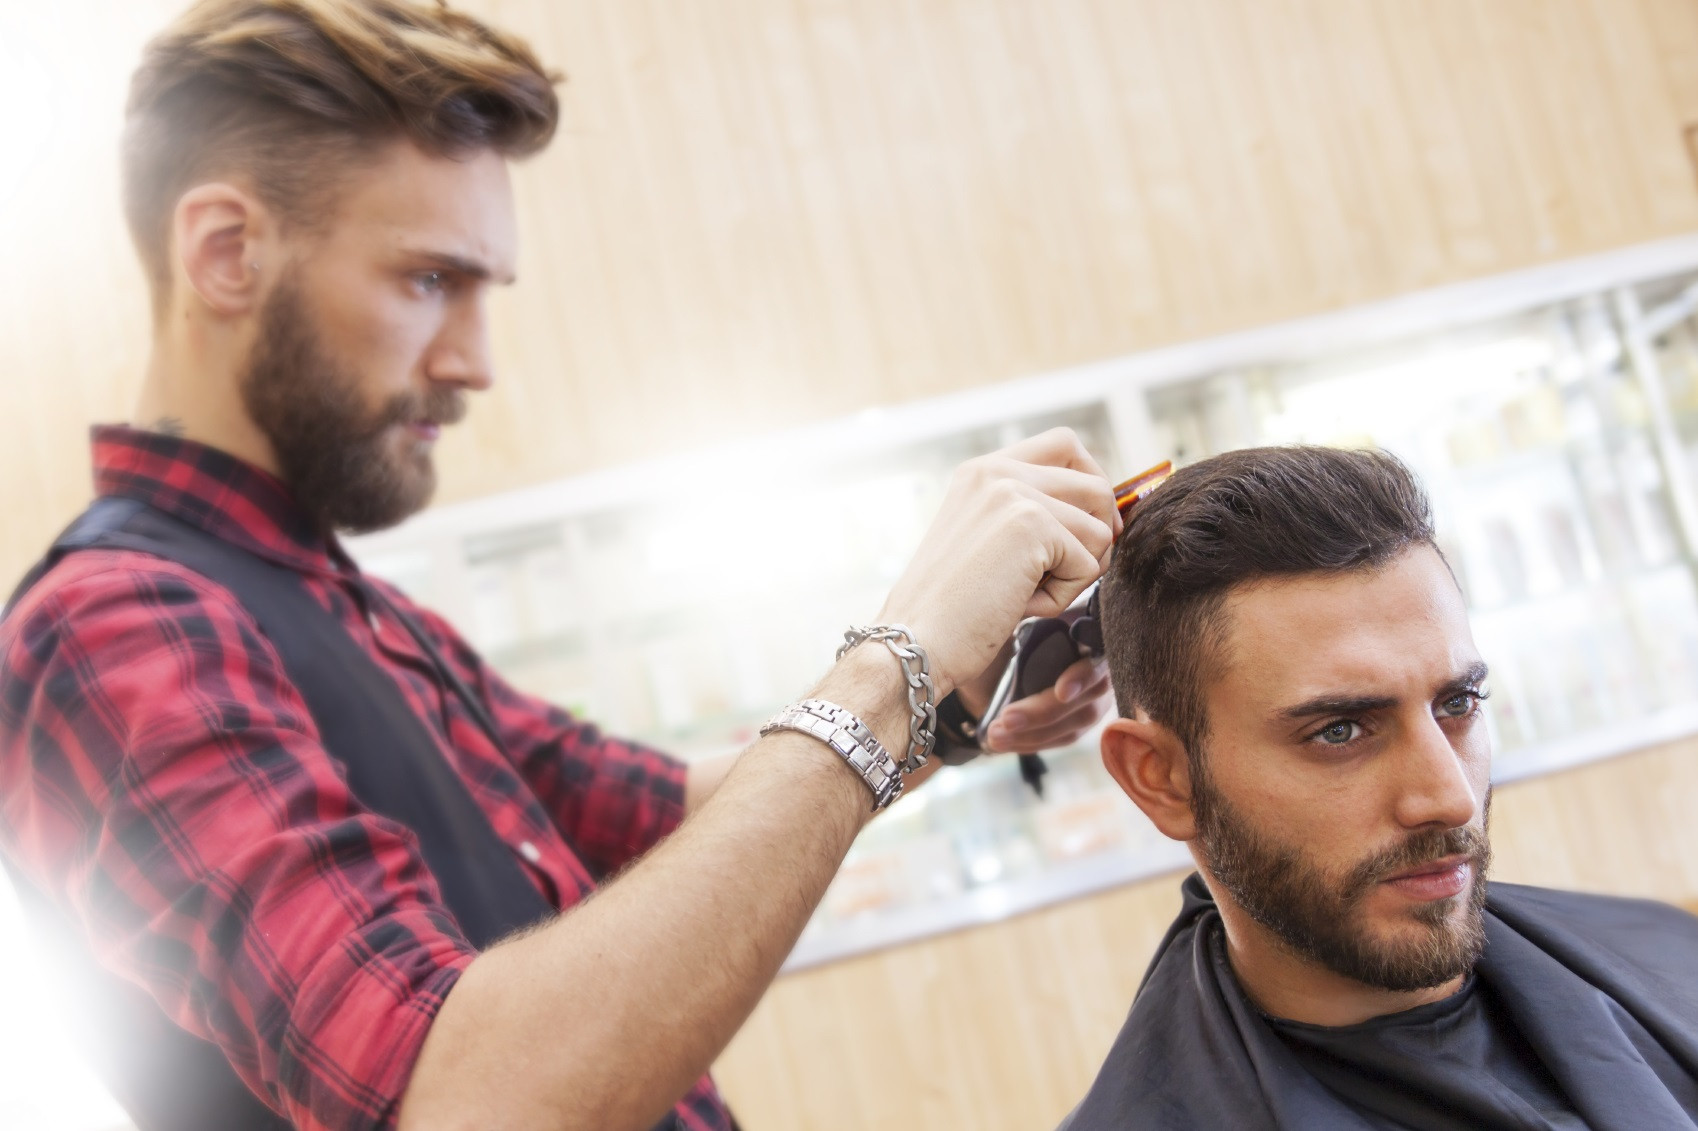 Barber Shops That Cut Women'S Hair
 How to Be Successful in Barbering School